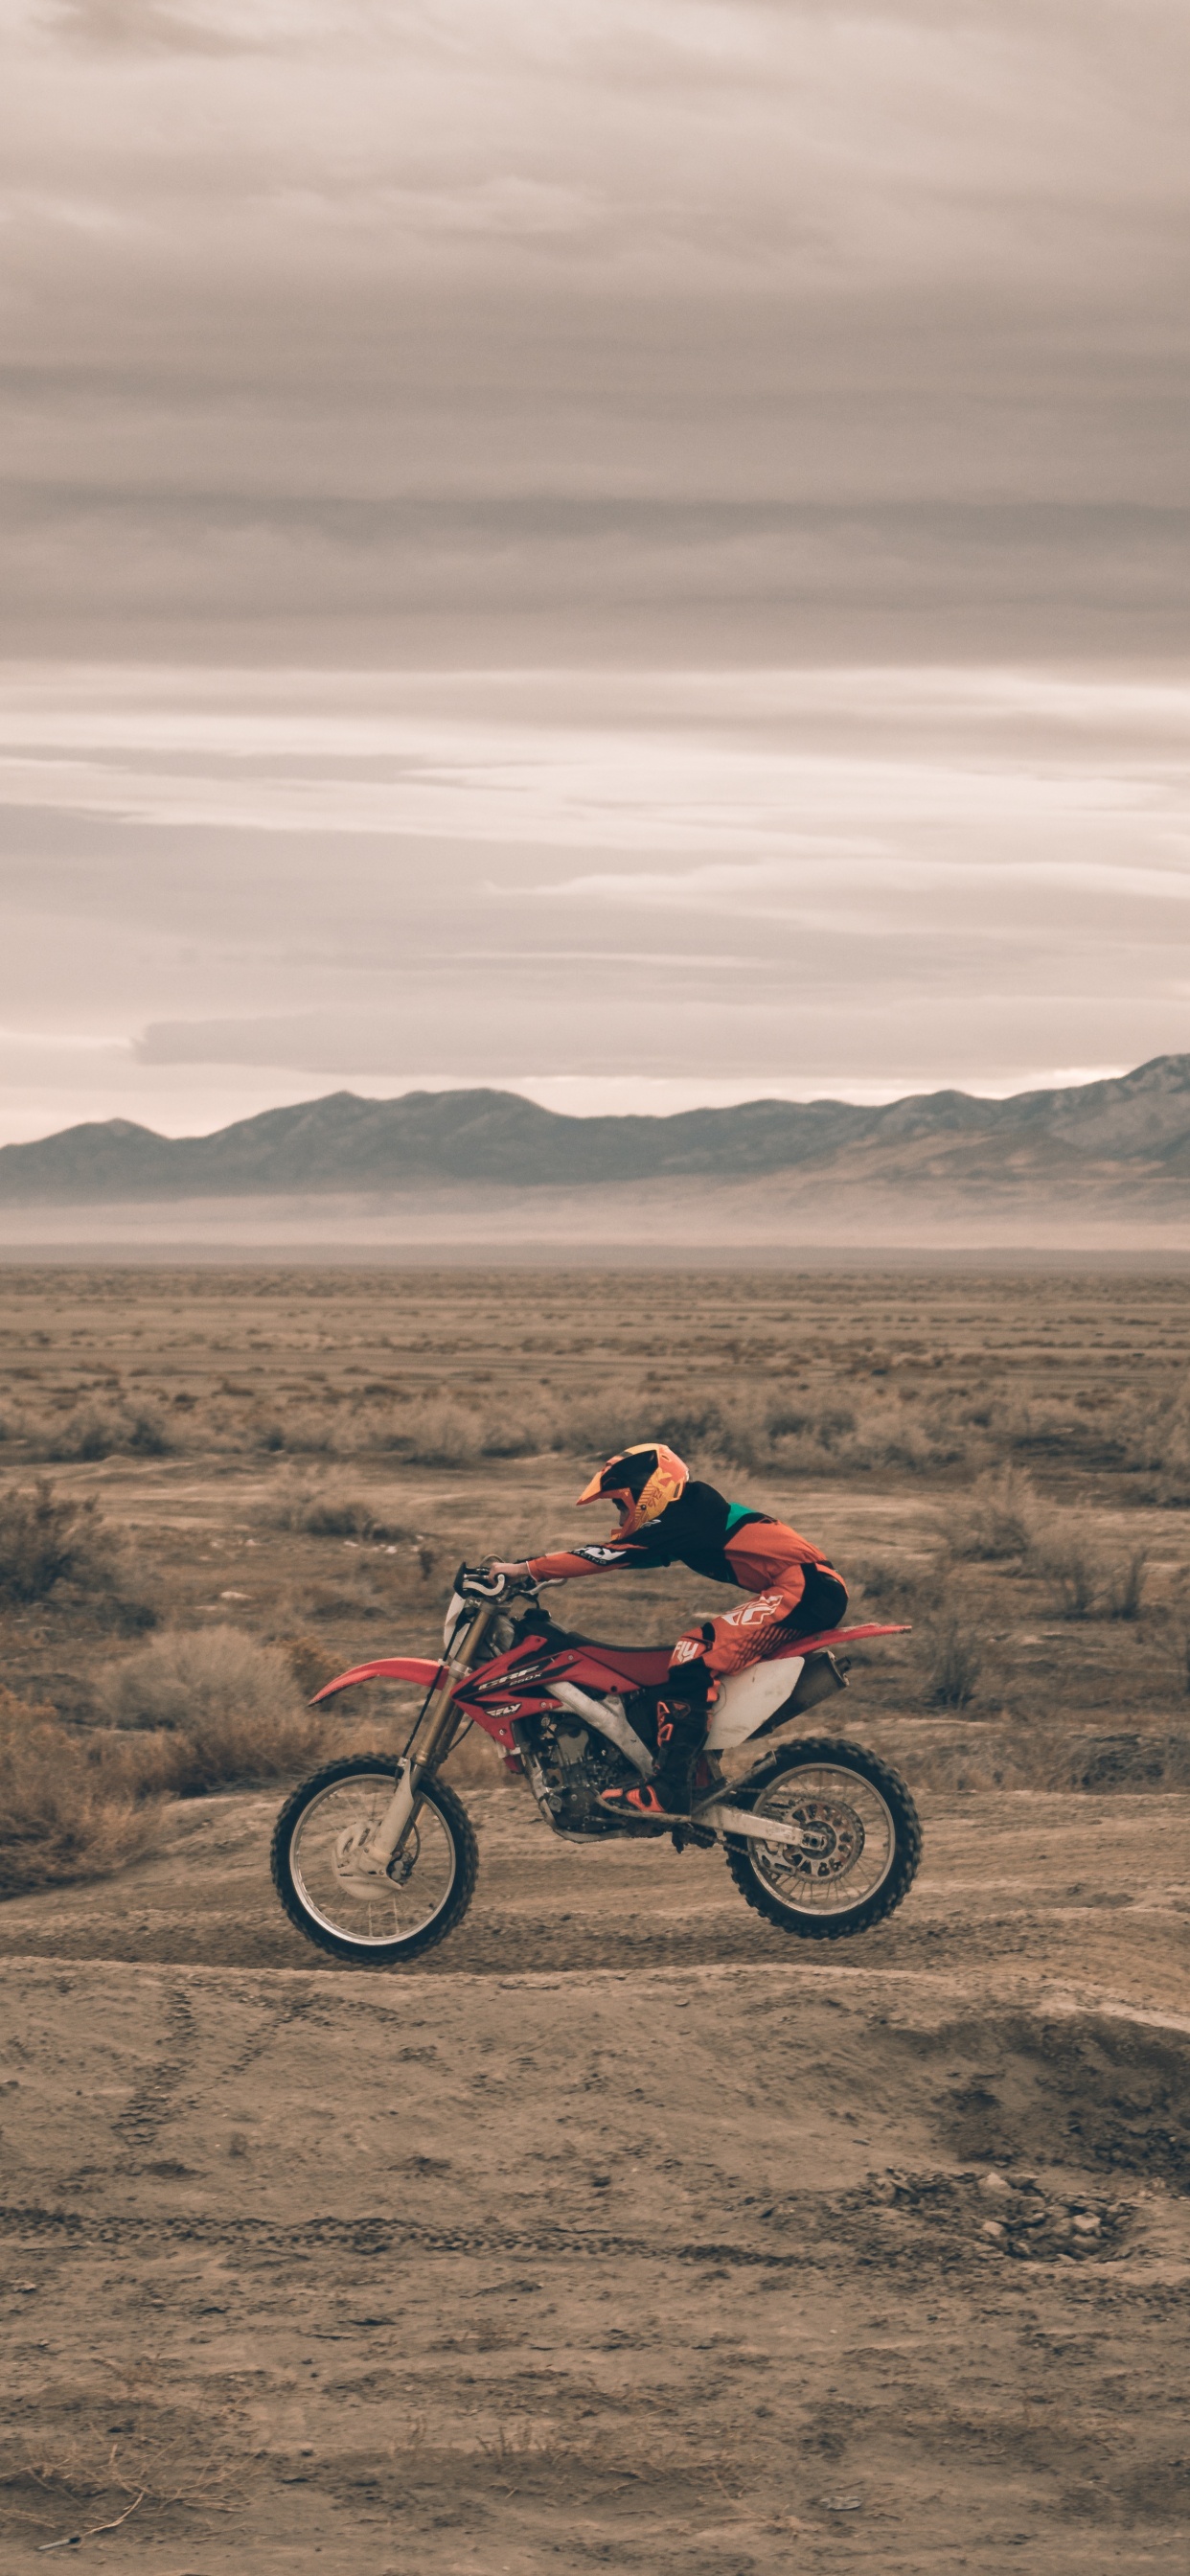 Man in Red Jacket Riding on Red Motorcycle on Brown Field During Daytime. Wallpaper in 1242x2688 Resolution